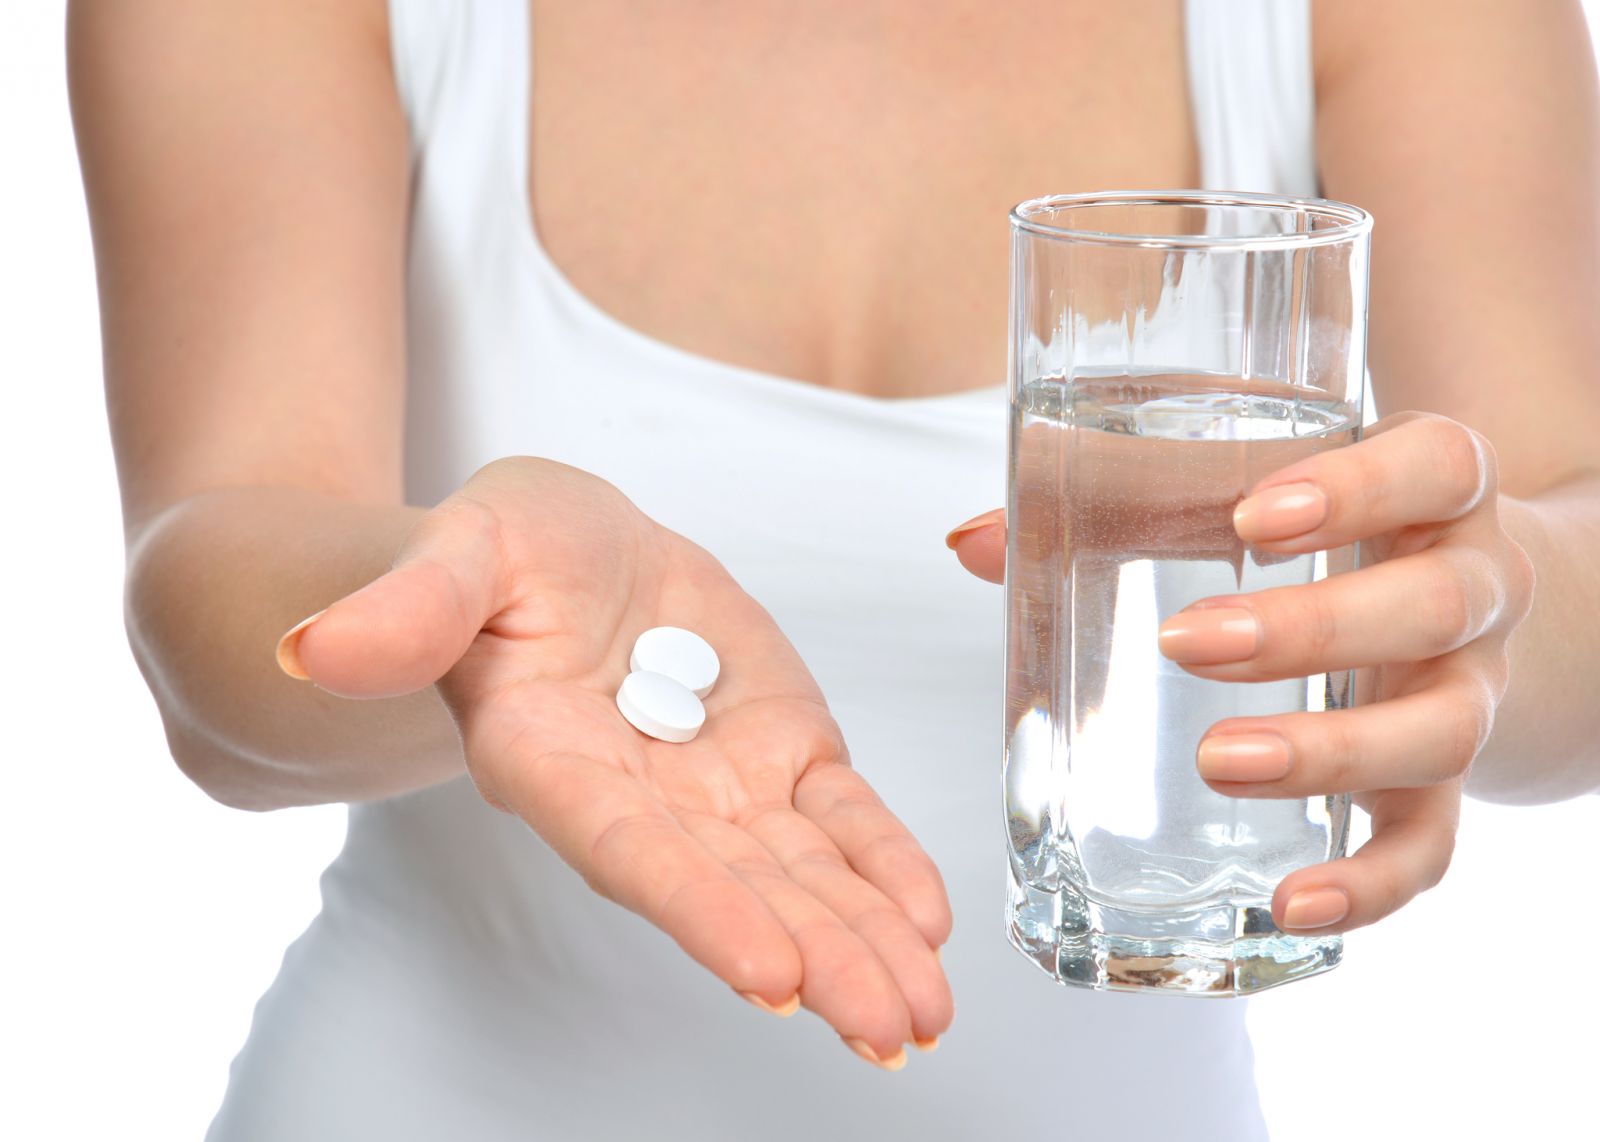 Paracetamol: A Medicine to Relieve Pain and Reduce Fever